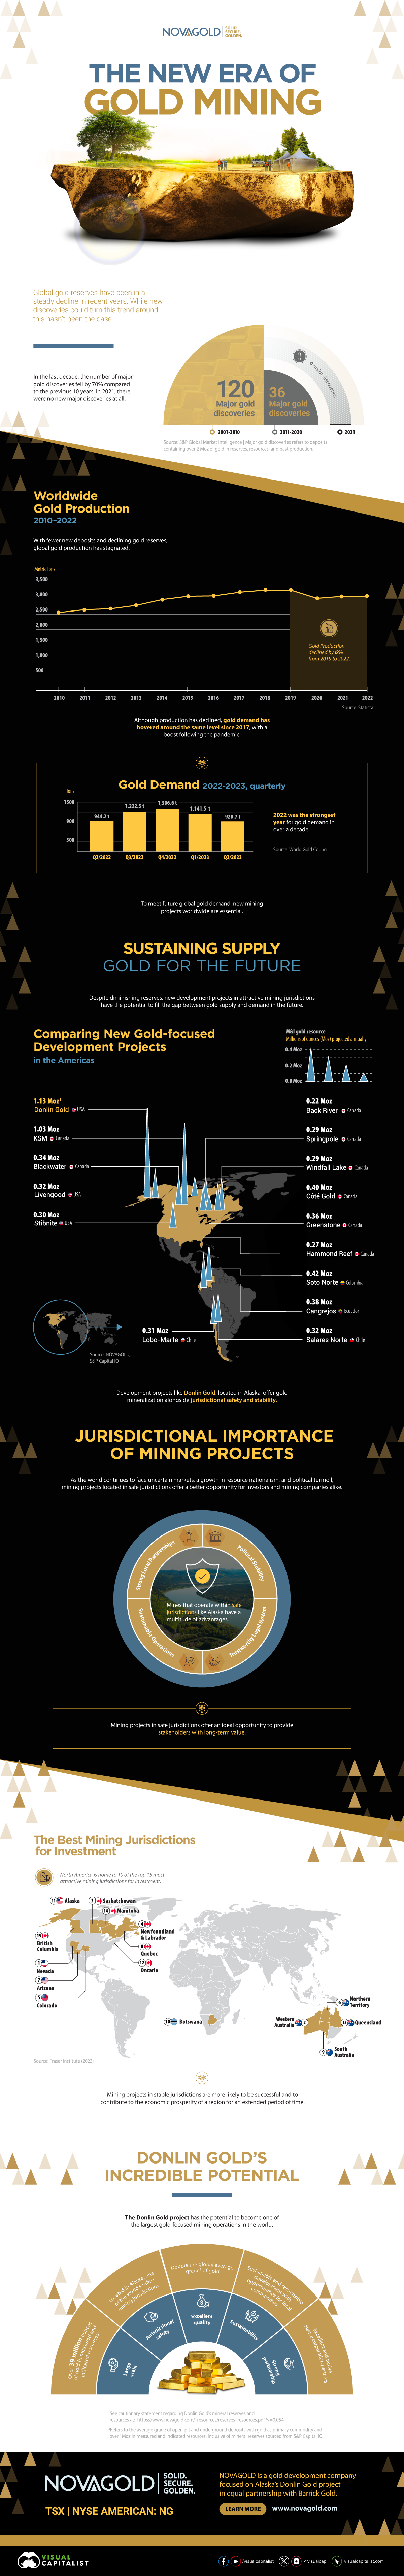 Novagold era of gold mining infographic